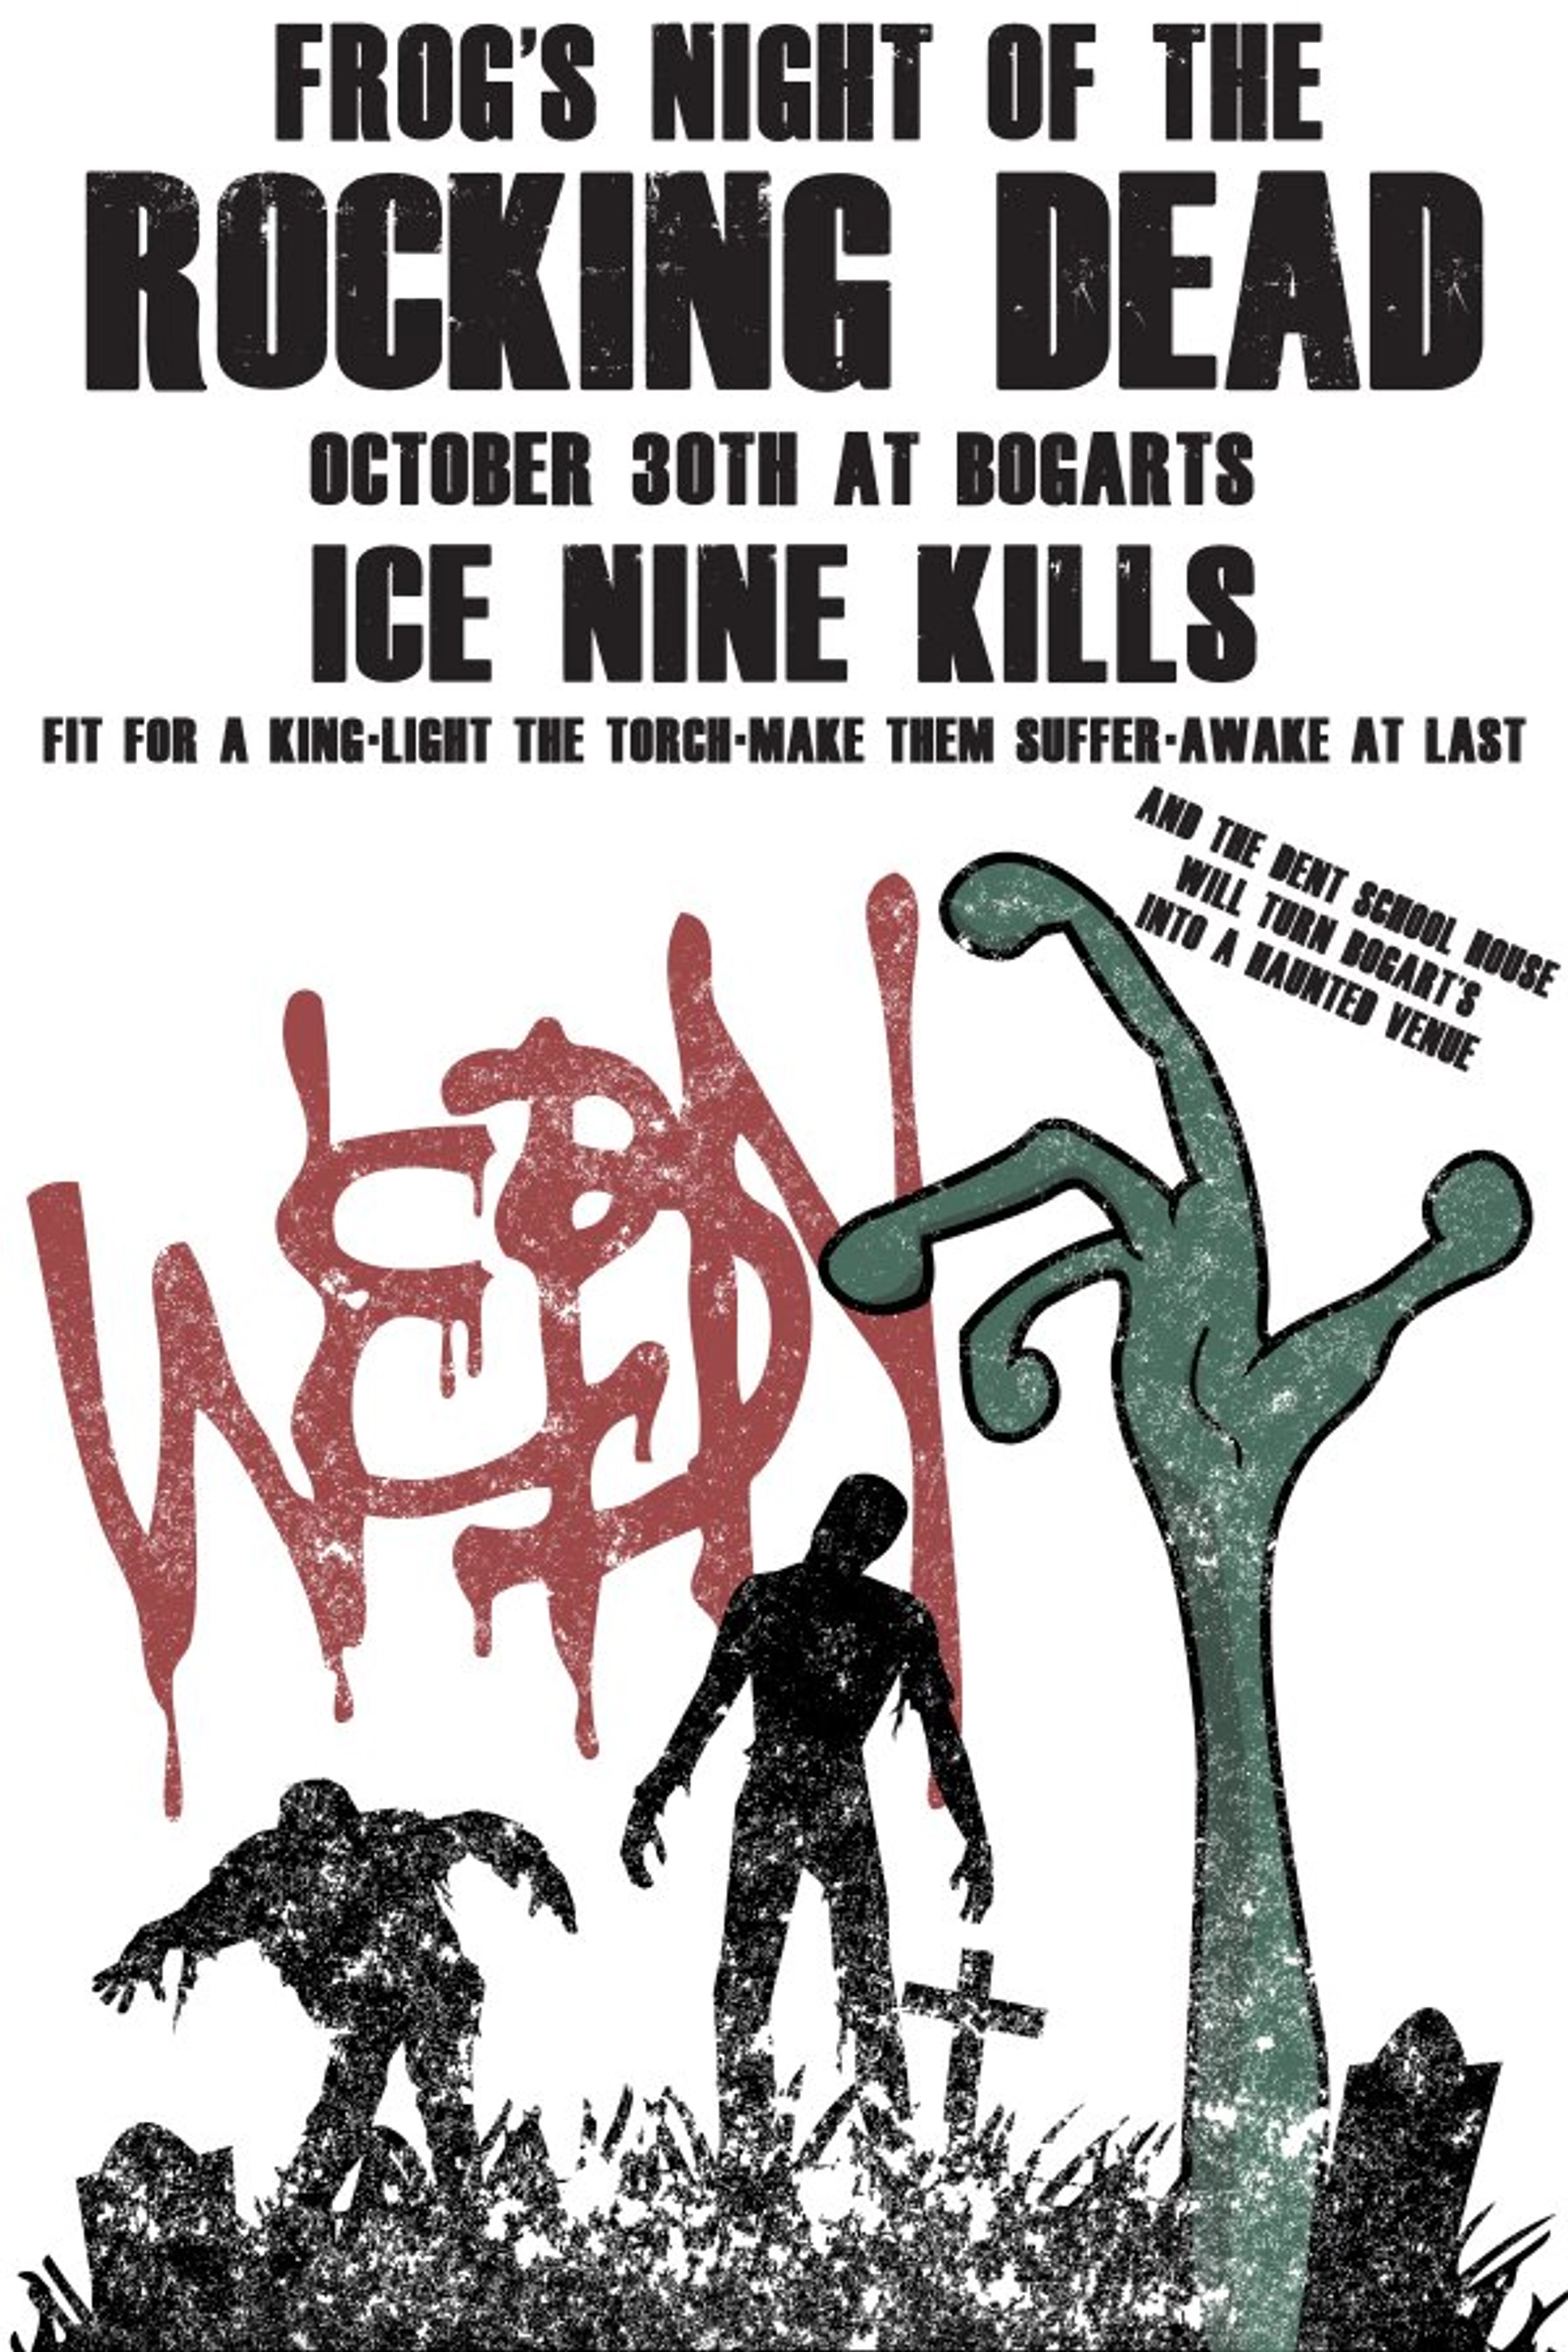 Win tickets to see Ice Nine Kills at Frog's Night Of The Rocking Dead! - Thumbnail Image